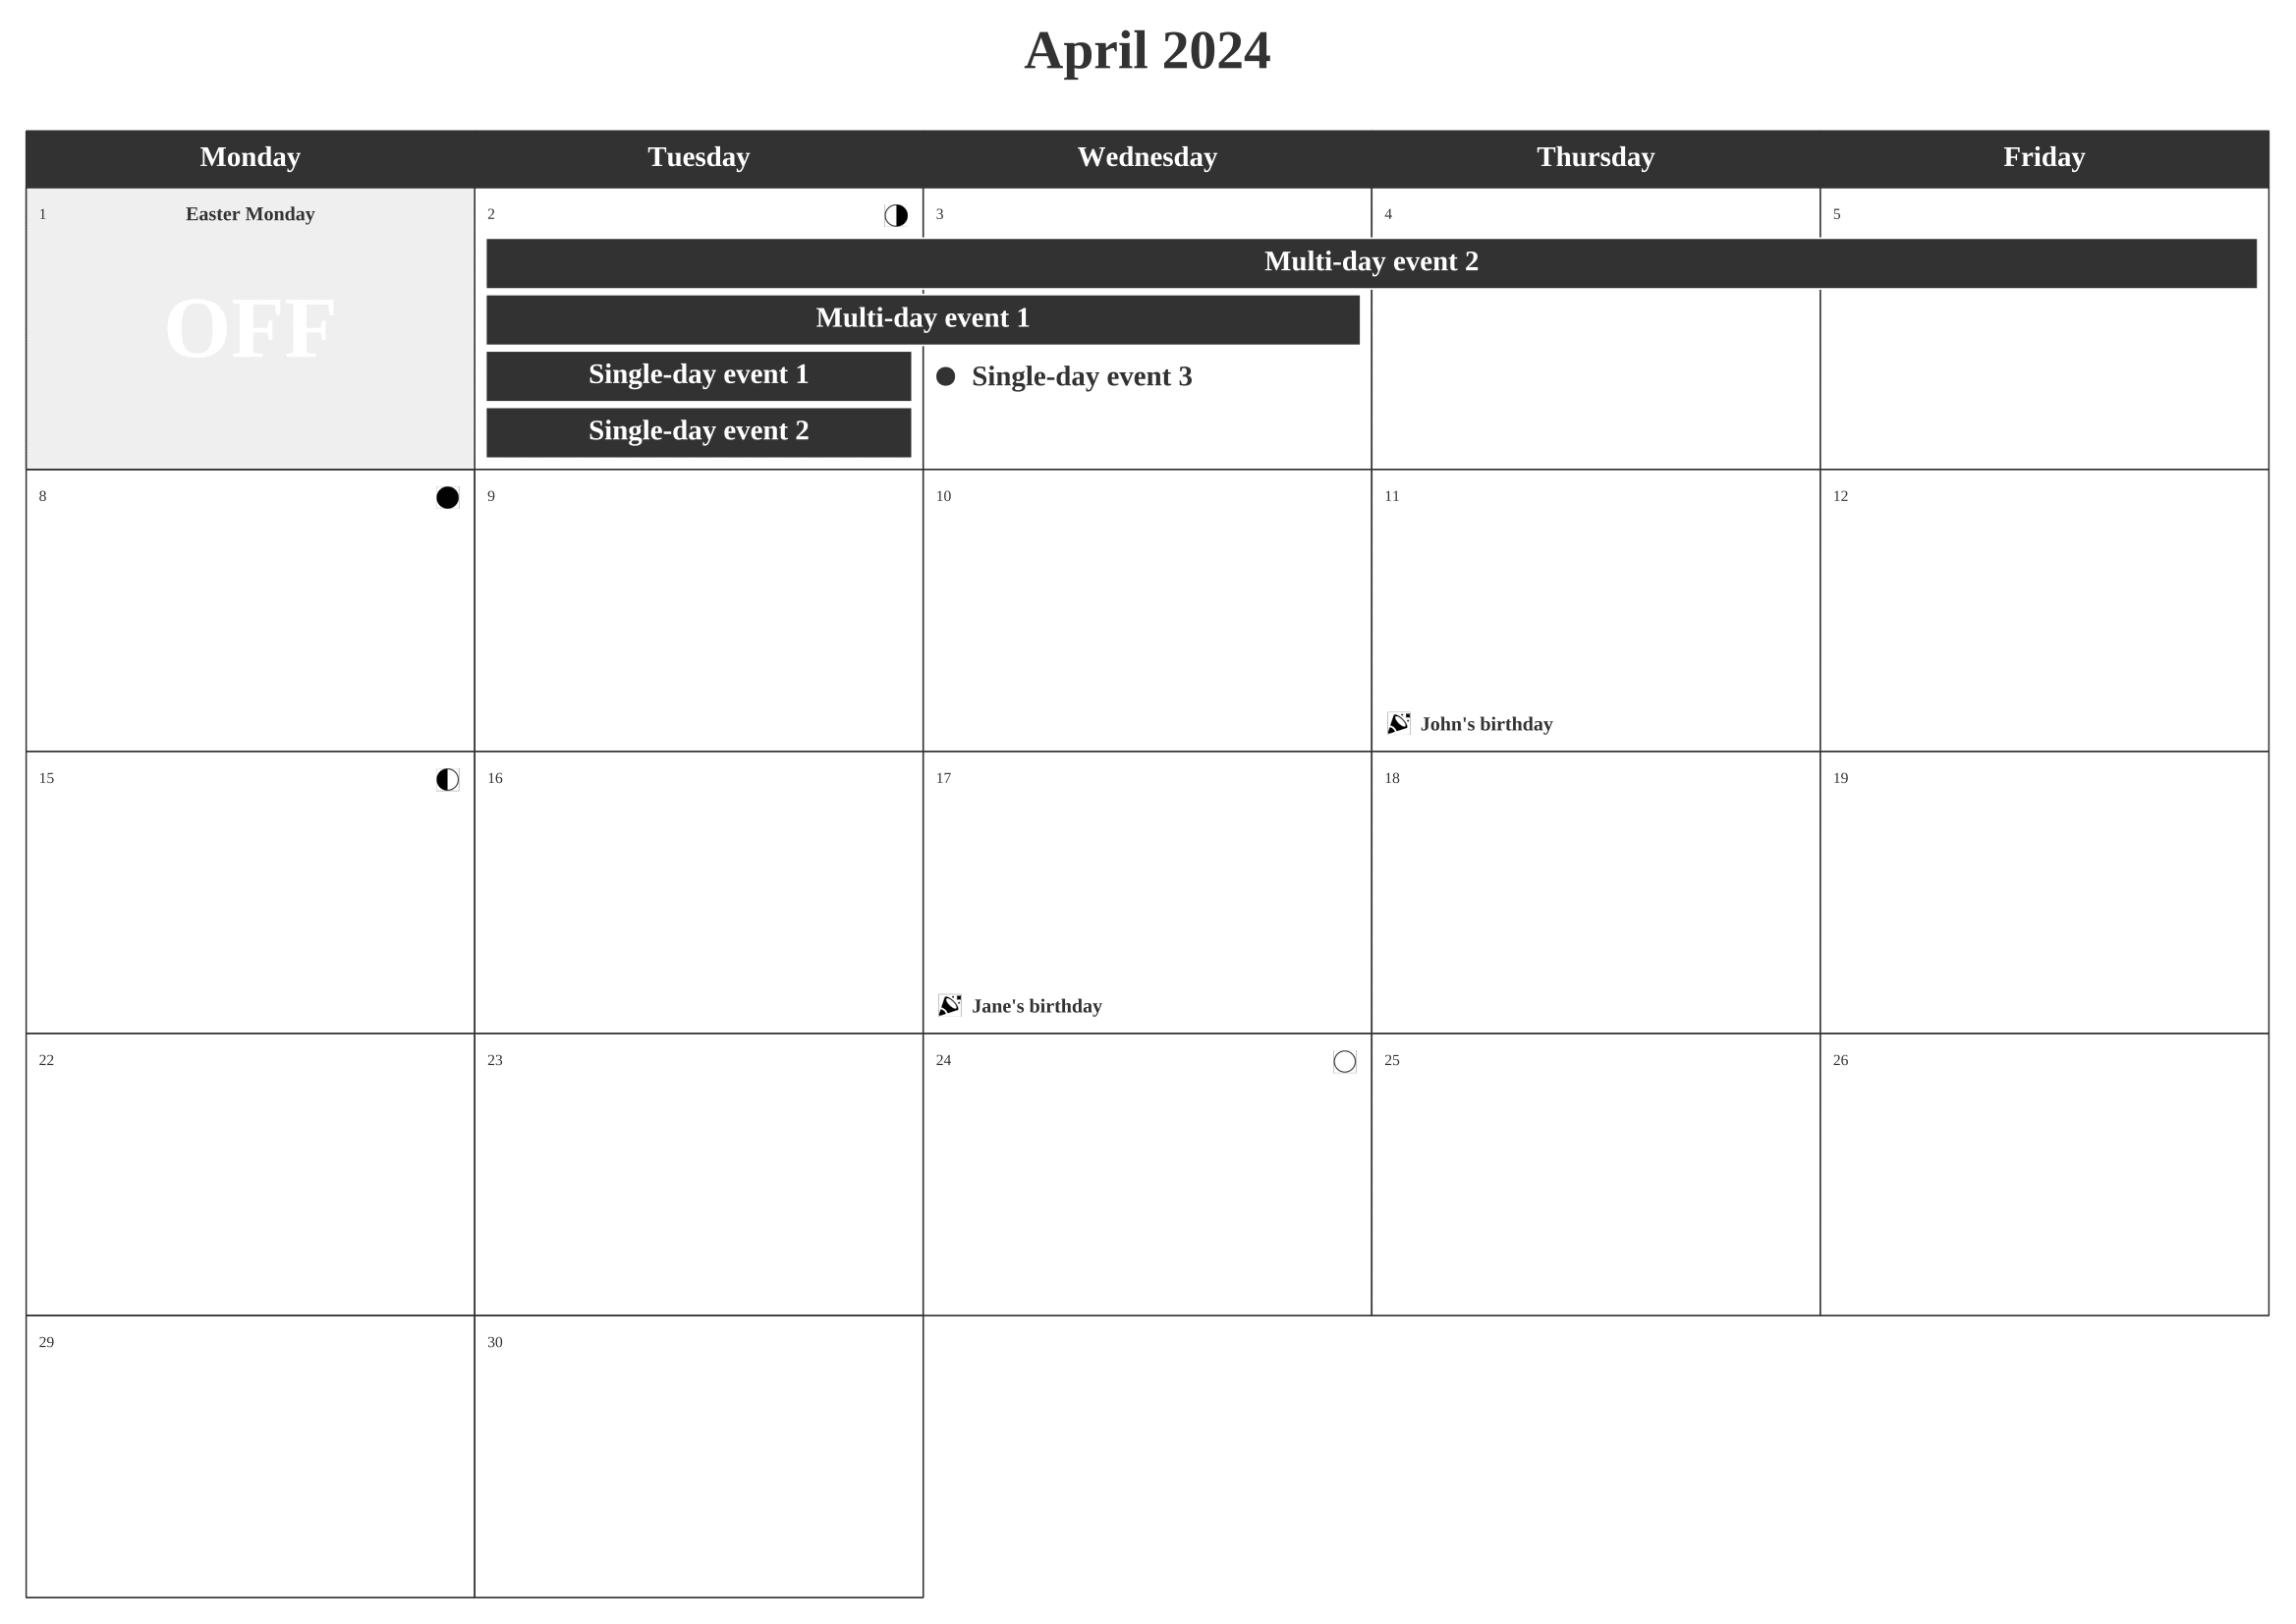 Monthly calendar - Multi-day events